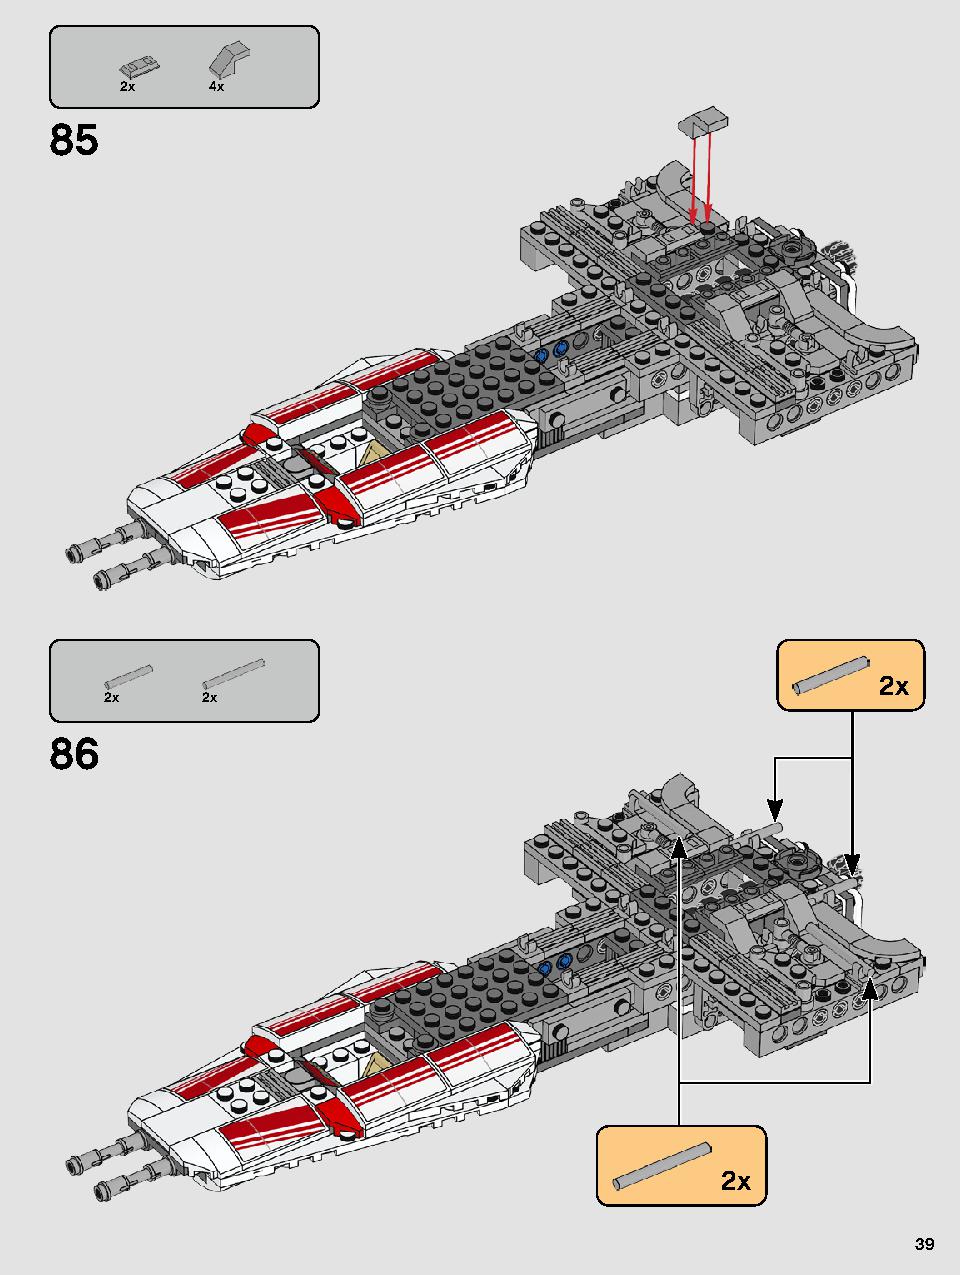 Resistance Y-Wing Starfighter 75249 LEGO information LEGO instructions 39 page